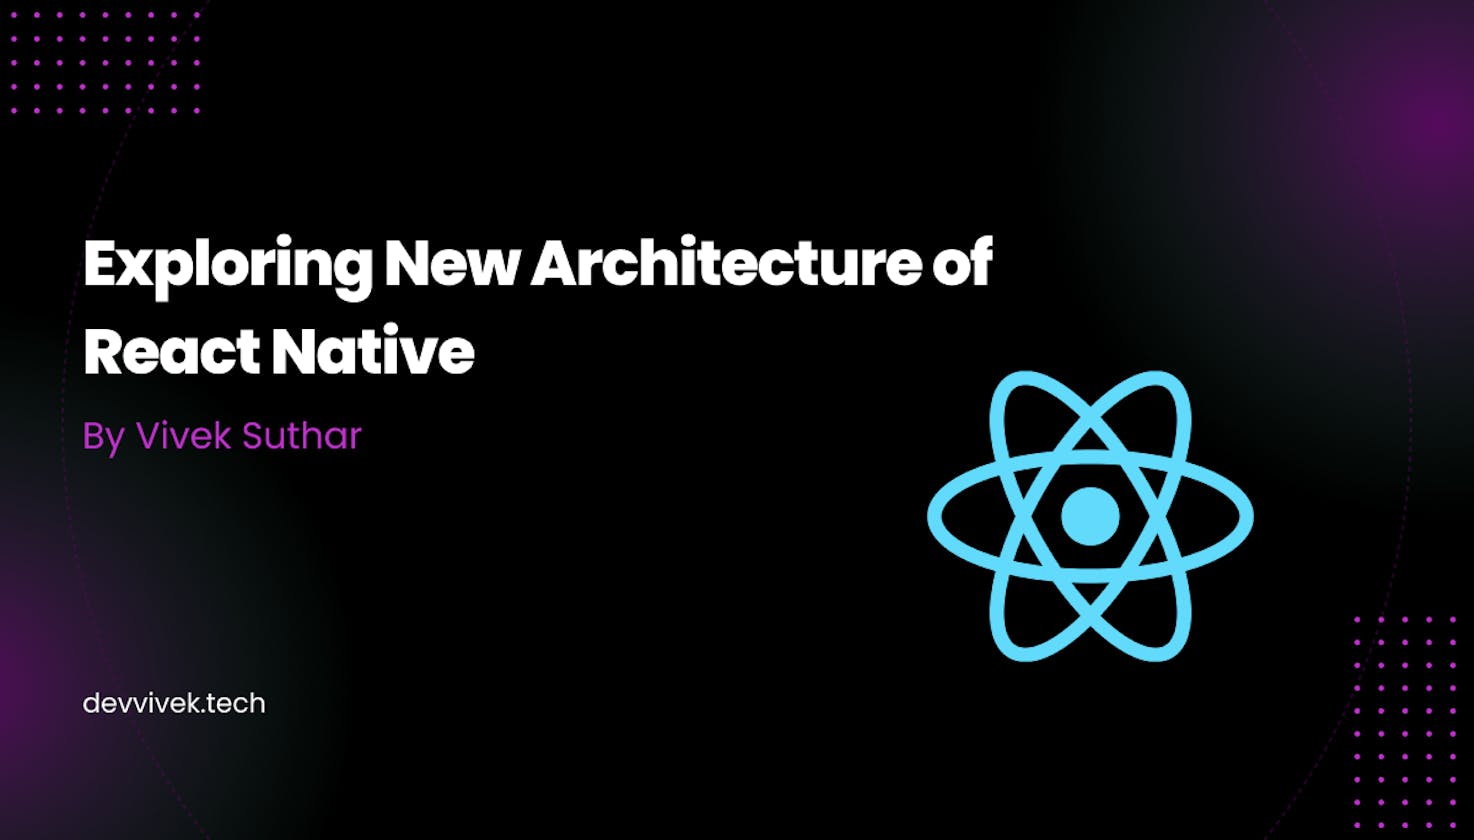 Exploring React Native's New Architecture: A Peek into the New Architecture